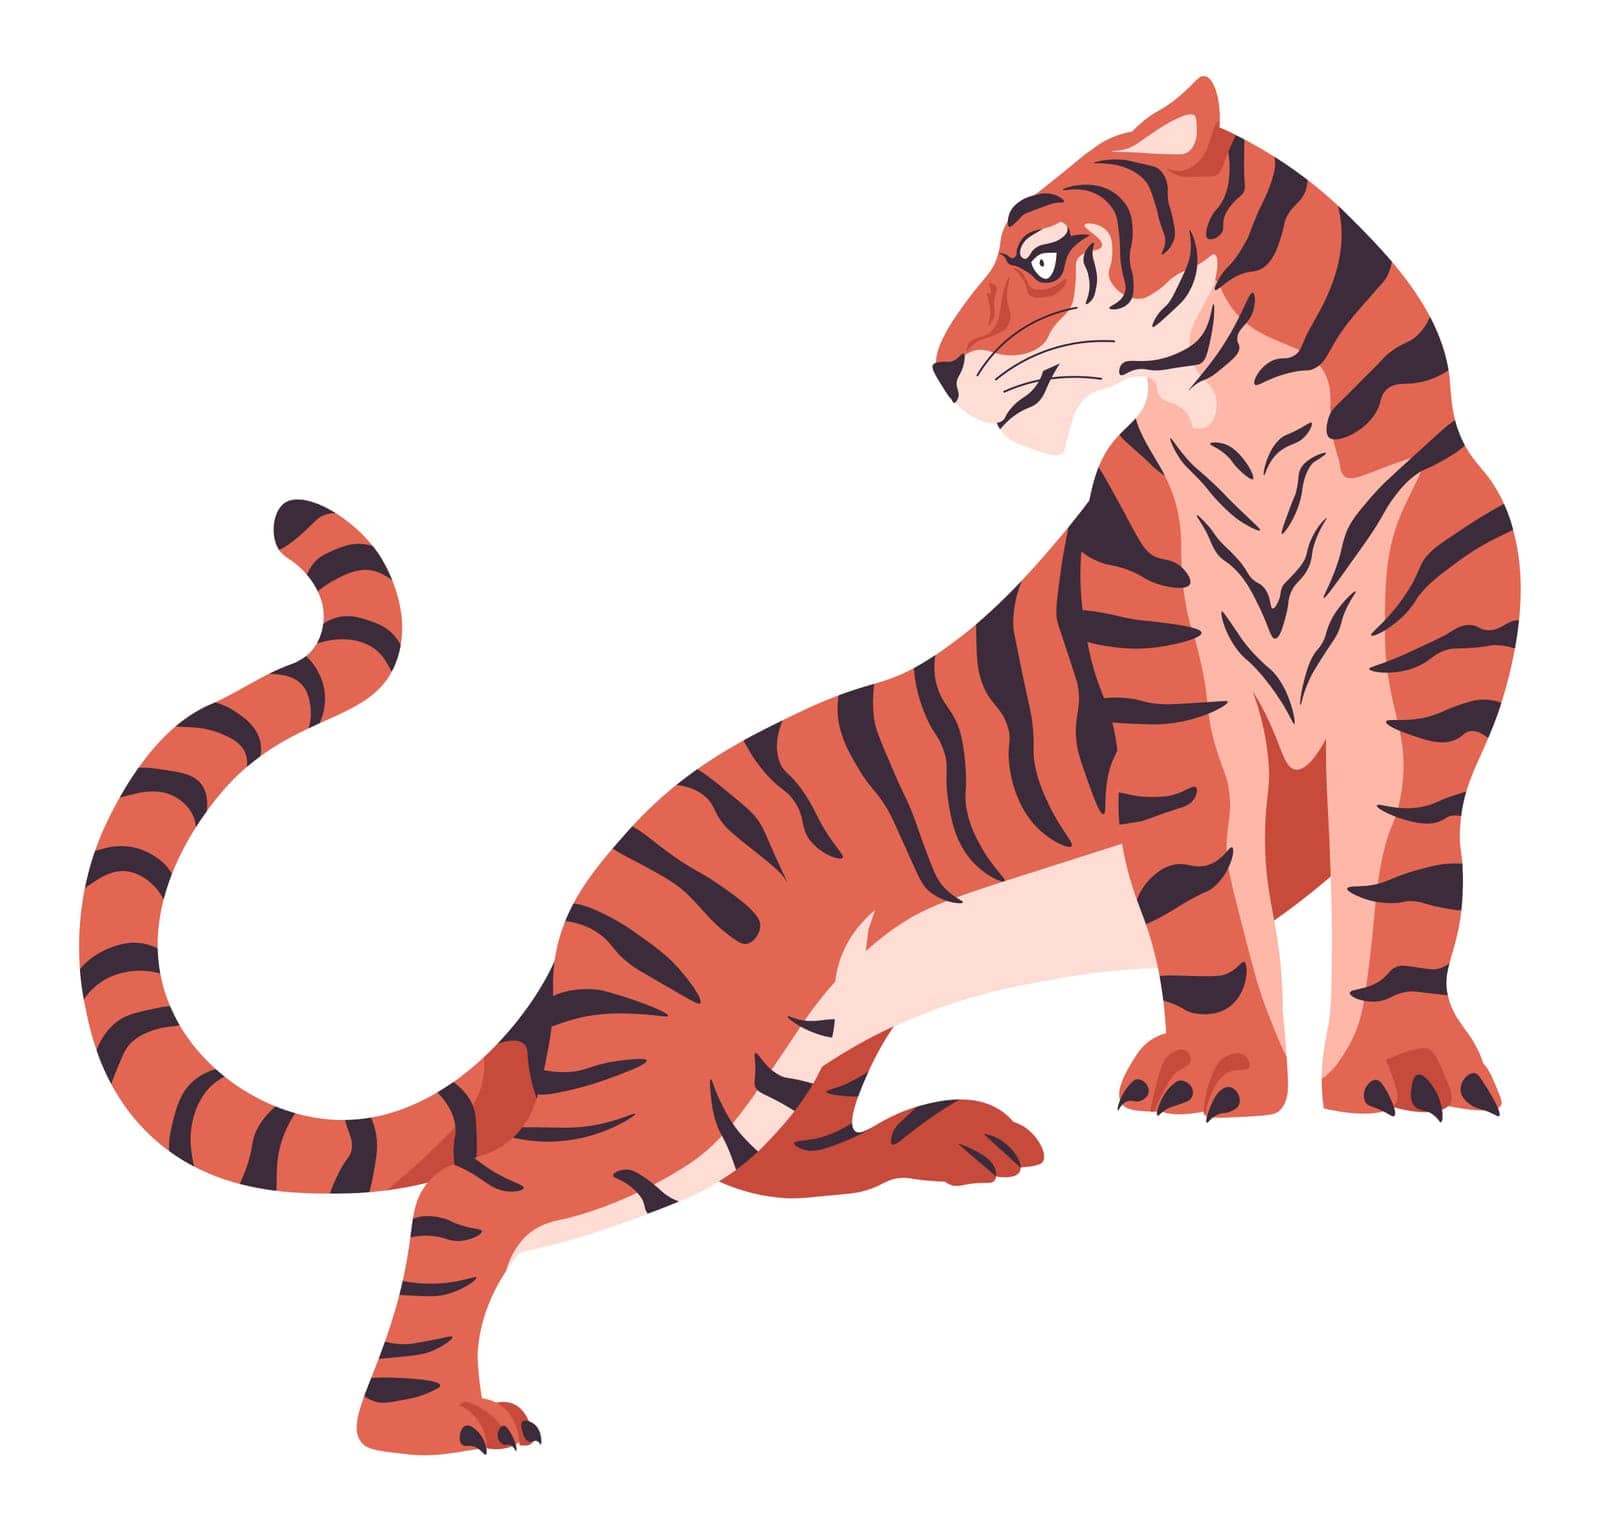 Exotic feline mammal in profile view, isolated Bengal tiger with furry coat and stripes. Dangerous predator or carnivore Asian fauna. Jungle or zoo dweller. Vector in flat style illustration